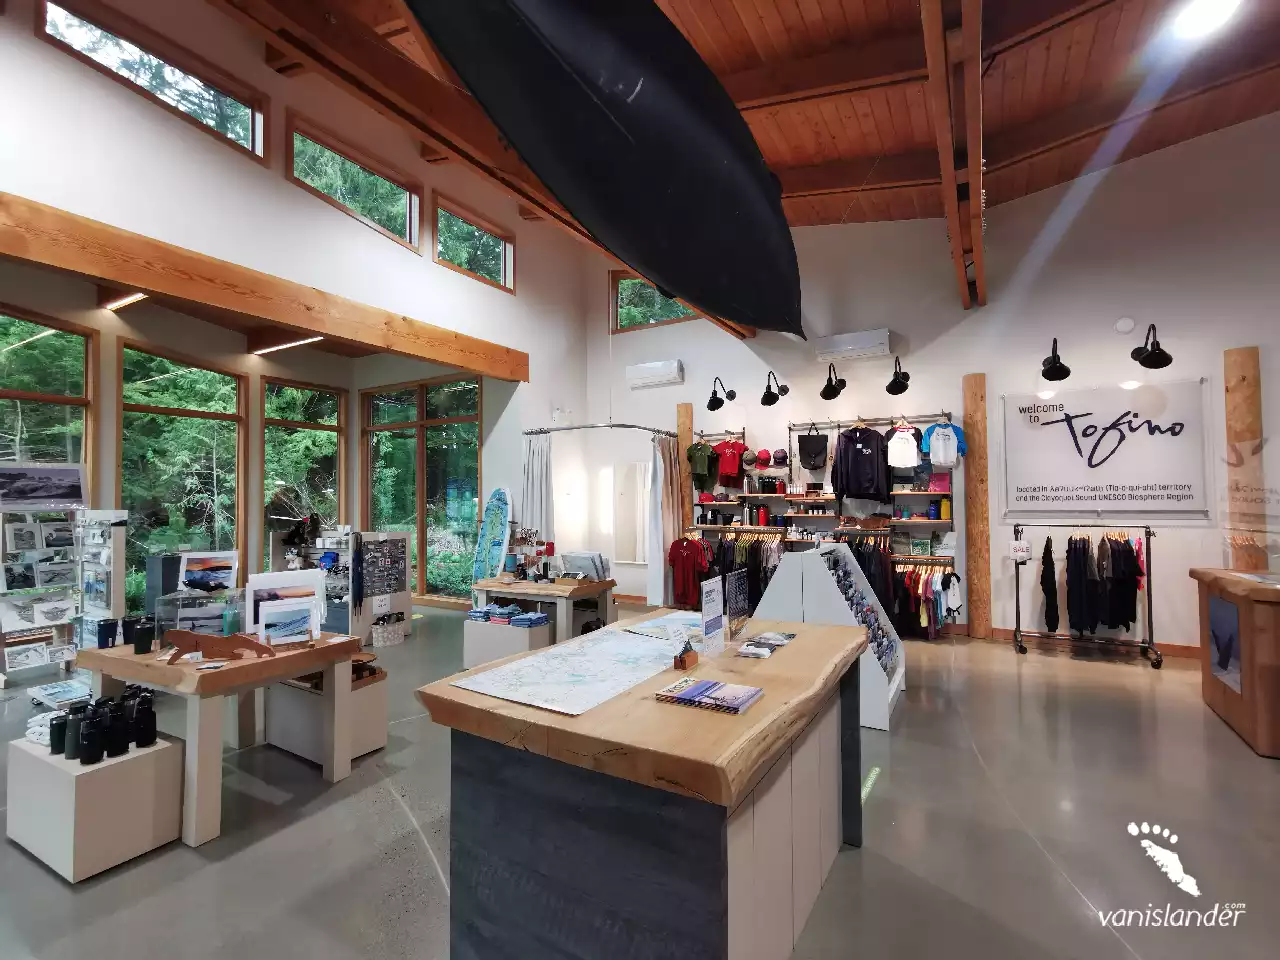 Tofino Surf Shop view ( inside of the store),  Vancouver Island